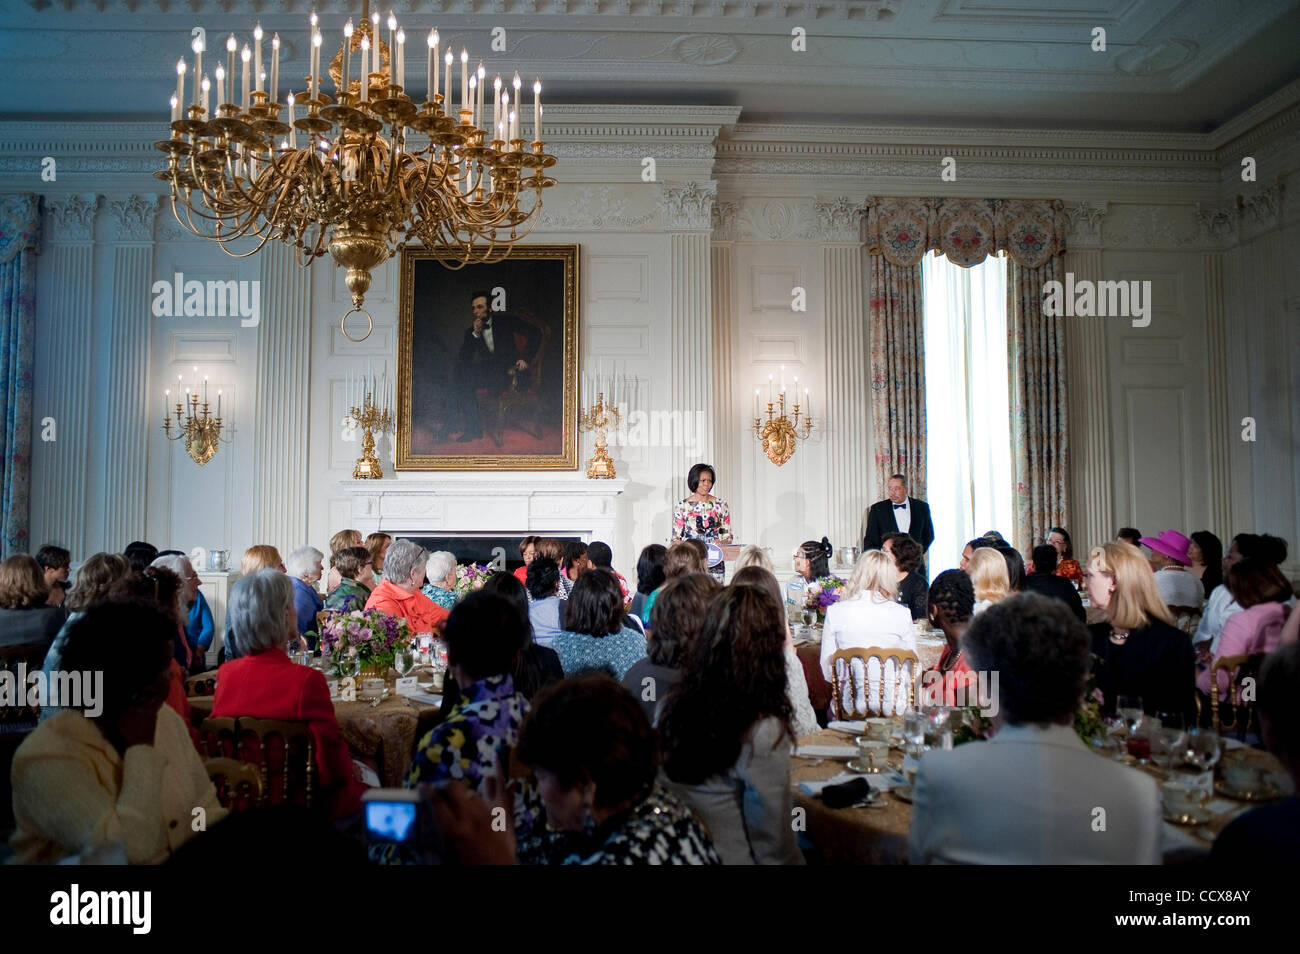 May 7,2010 - Washington, District of Columbia USA - First Lady Michelle Obama hosts a MotherÕs Day event in the State Dining Room of the White House. Mrs. Obama welcomed Former First Lady Rosalyn Carter and her granddaughter Sarah Carter, Tricia Nixon Cox, and Susan and Anne Eisenhower back to the W Stock Photo